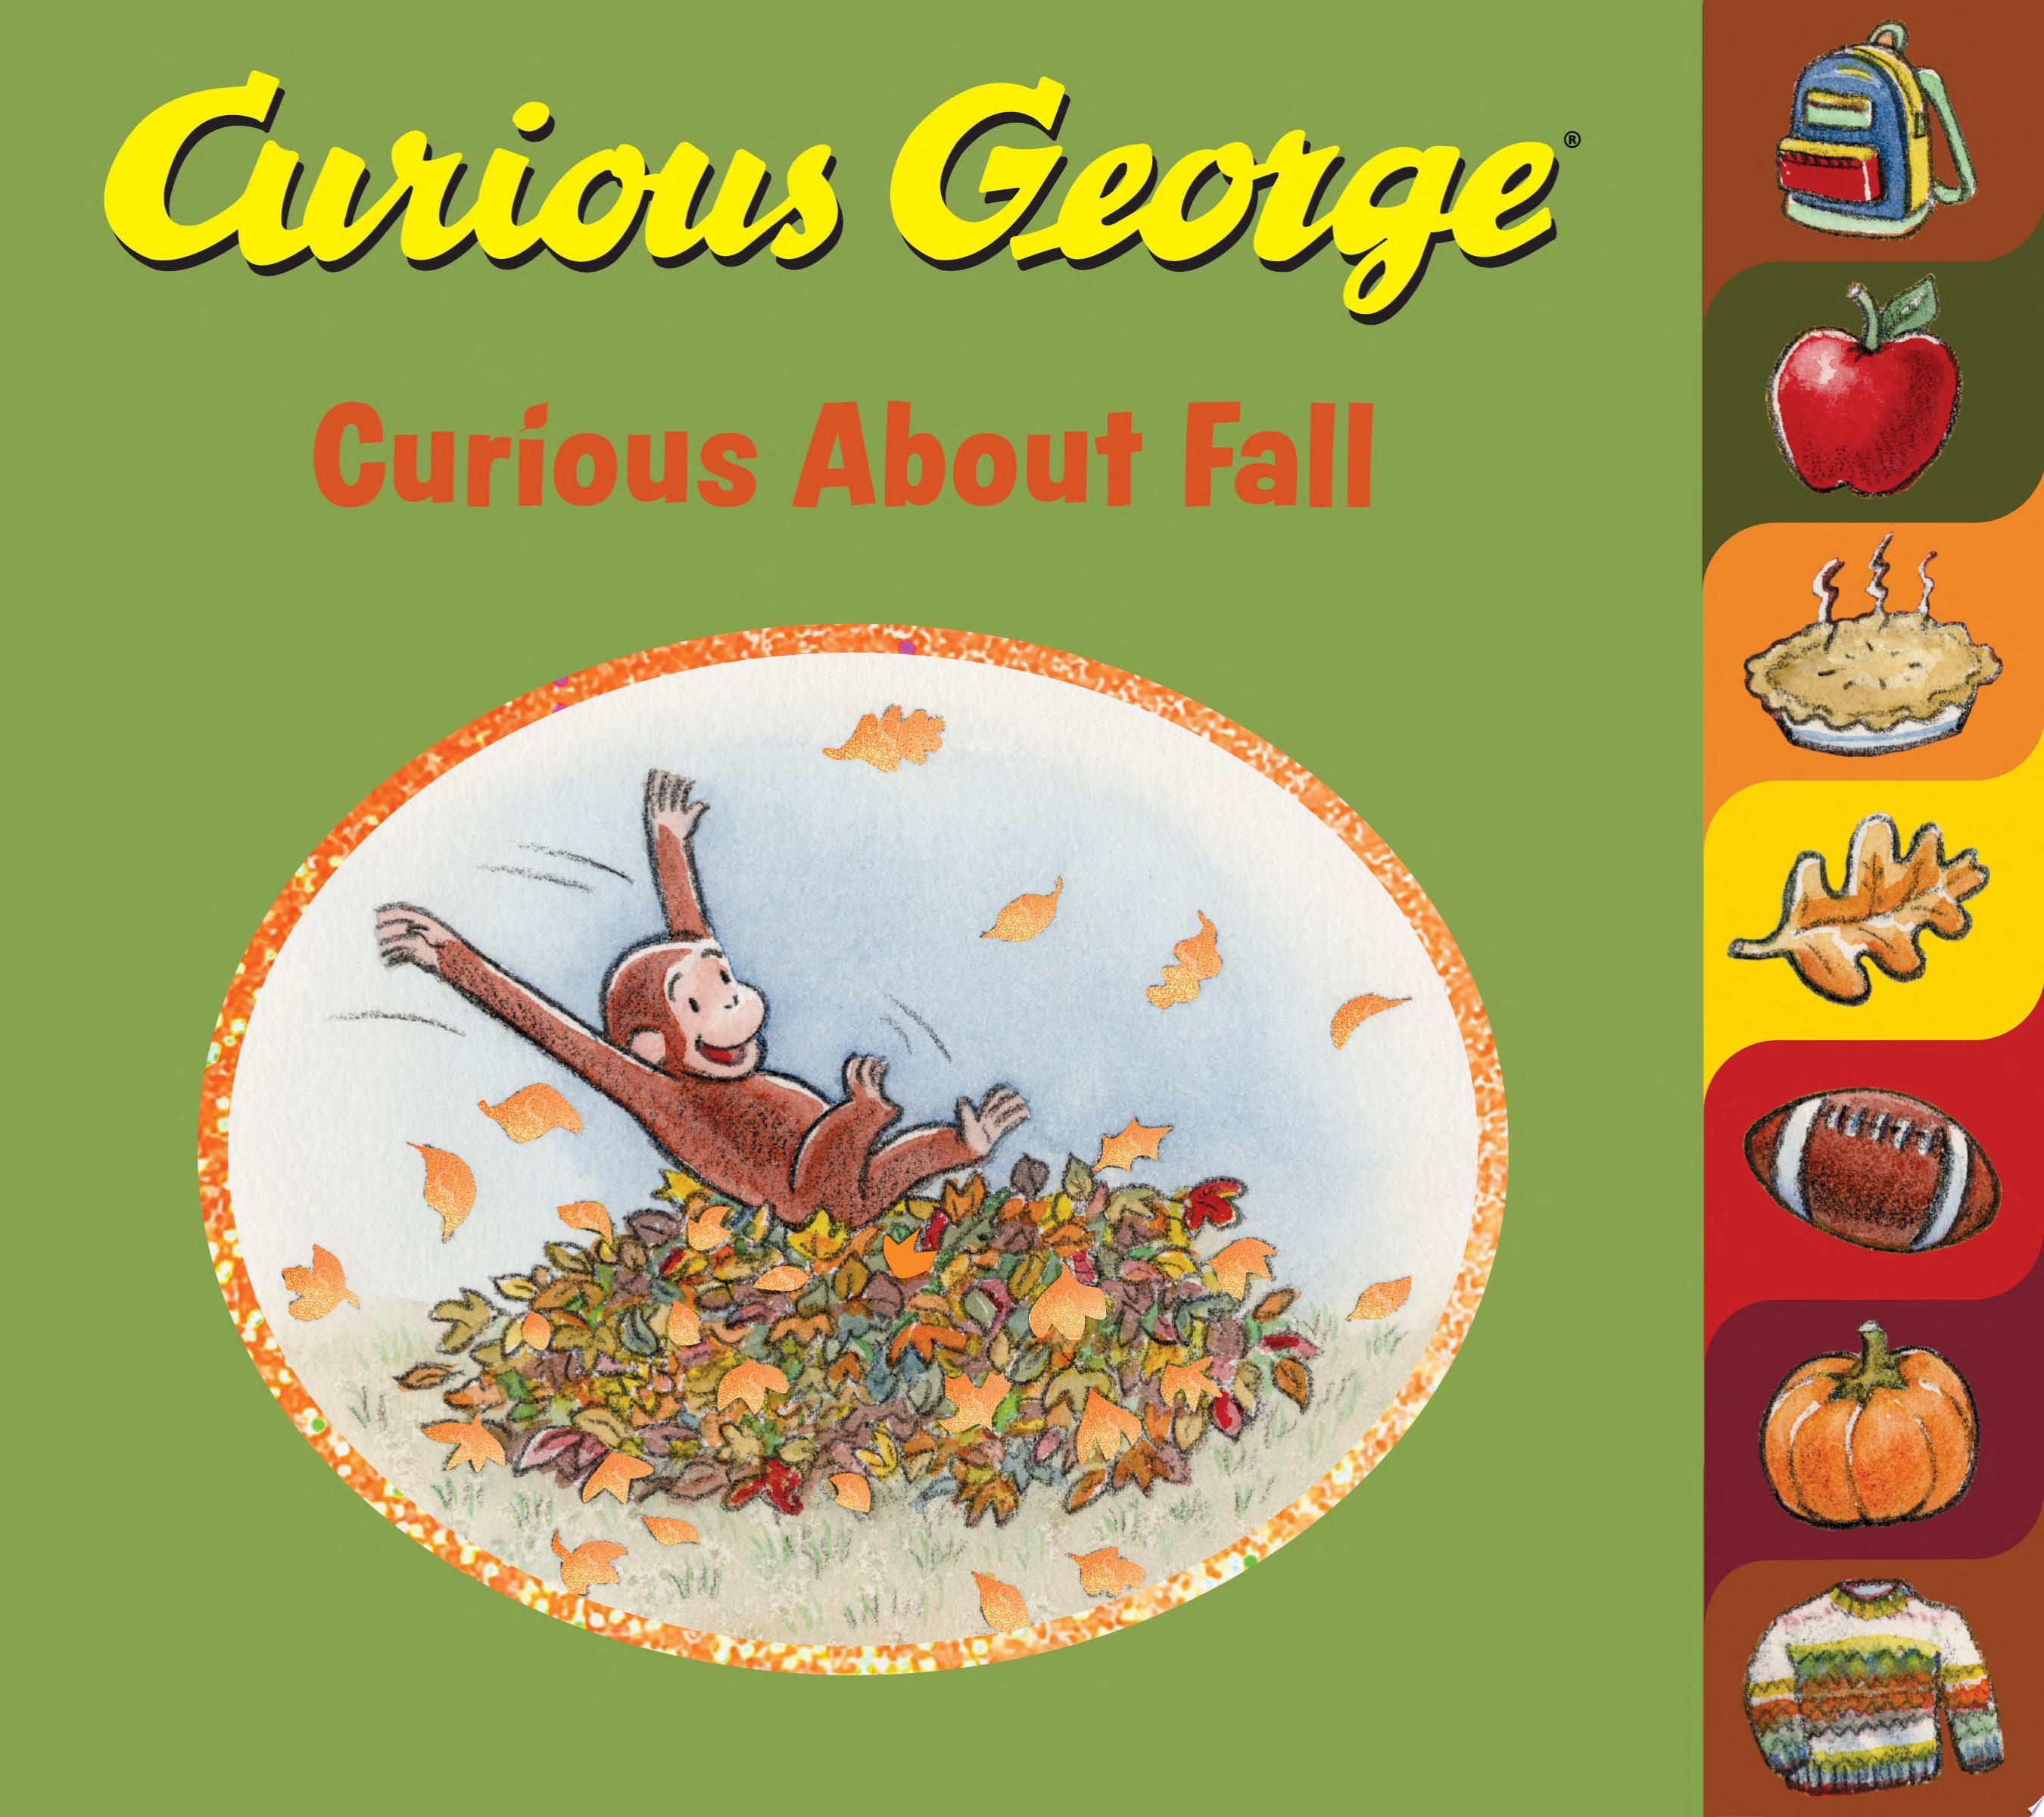 Image for "Curious George Curious About Fall"